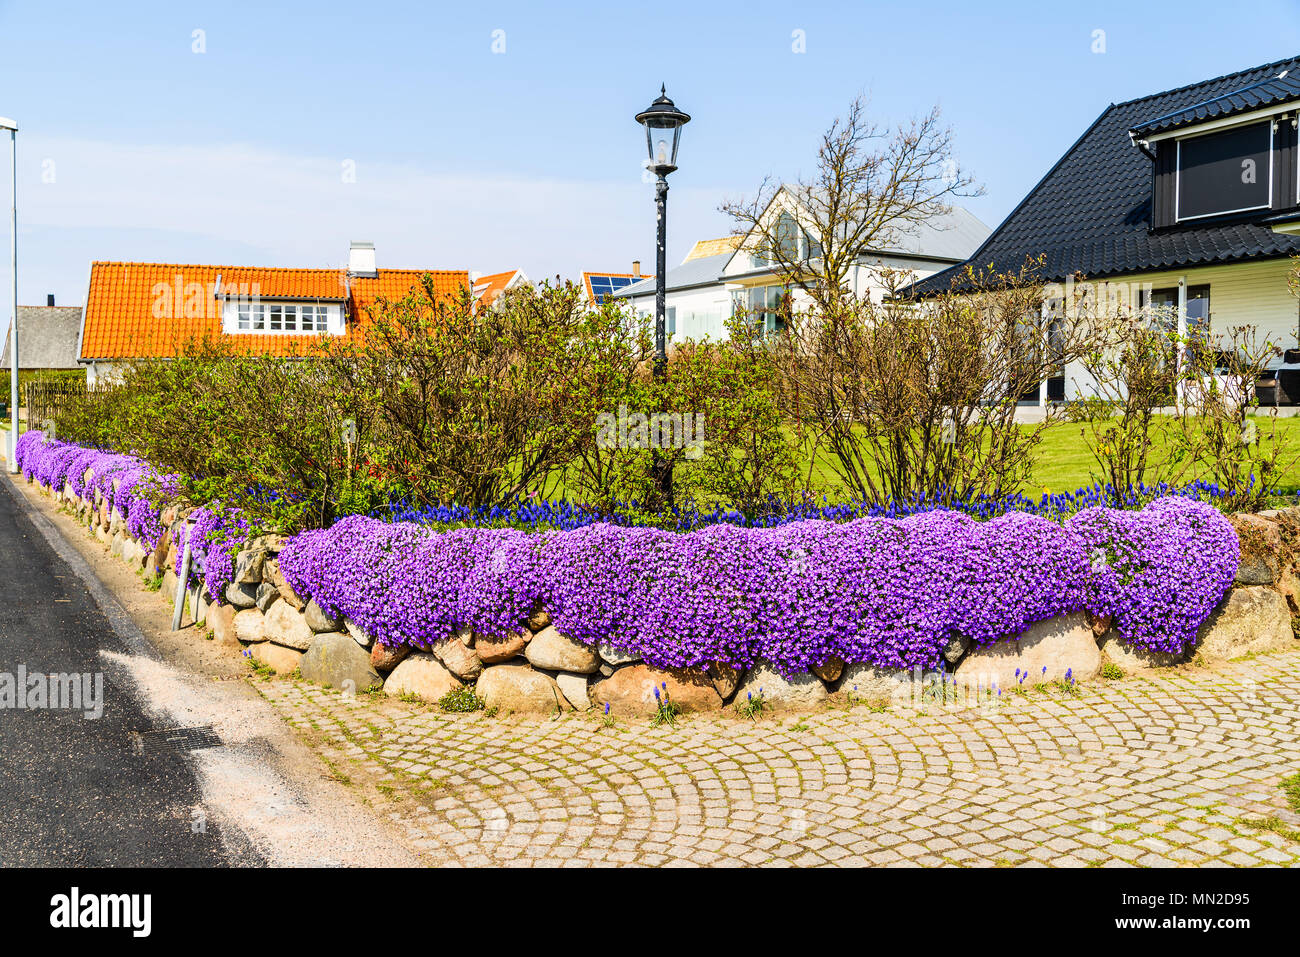 Lovely stone wall with Aubrieta or Aubretia flowers in full bloom on a sunny spring day. Stock Photo